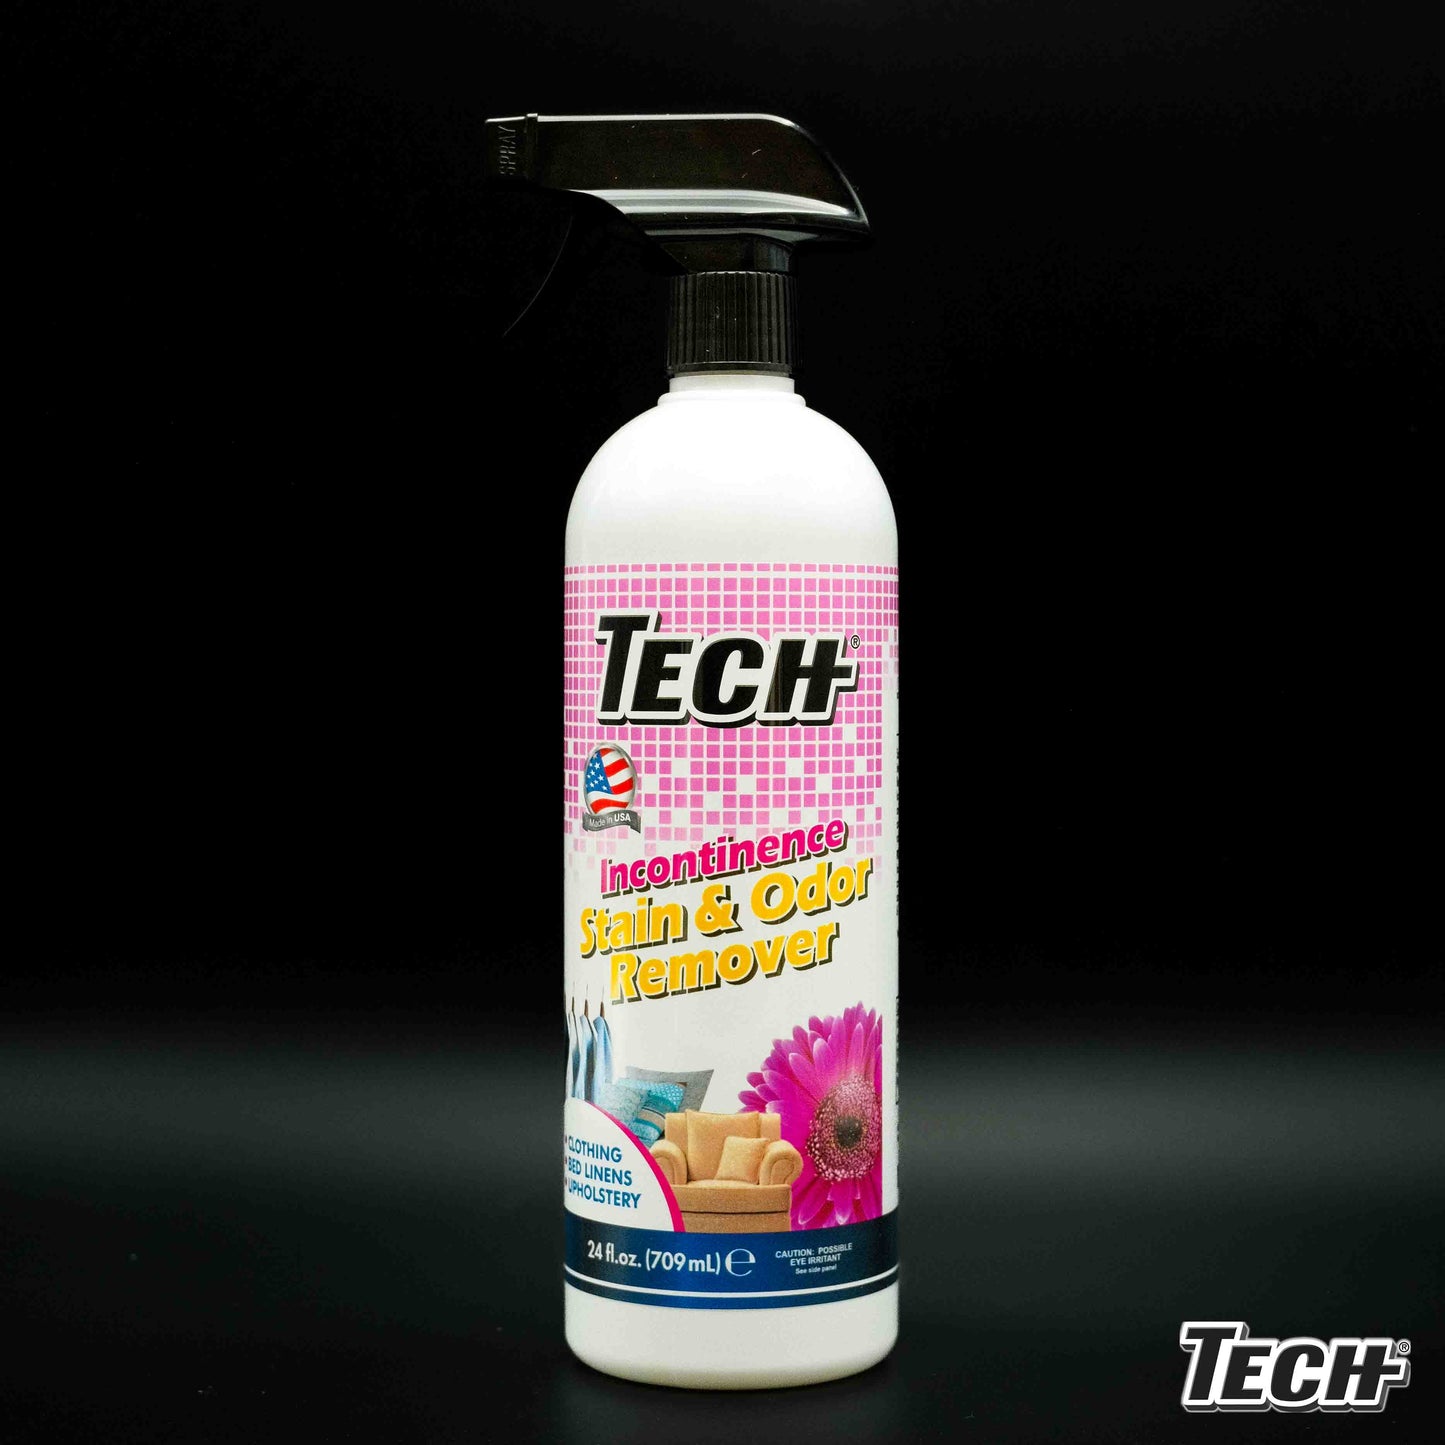 TECH Incontinence Stain & Odor Remover 24 oz - 2 pk Helps Eliminate Stains & Odors Caused From Incontinence, Safe For All Water-Washable Fabrics